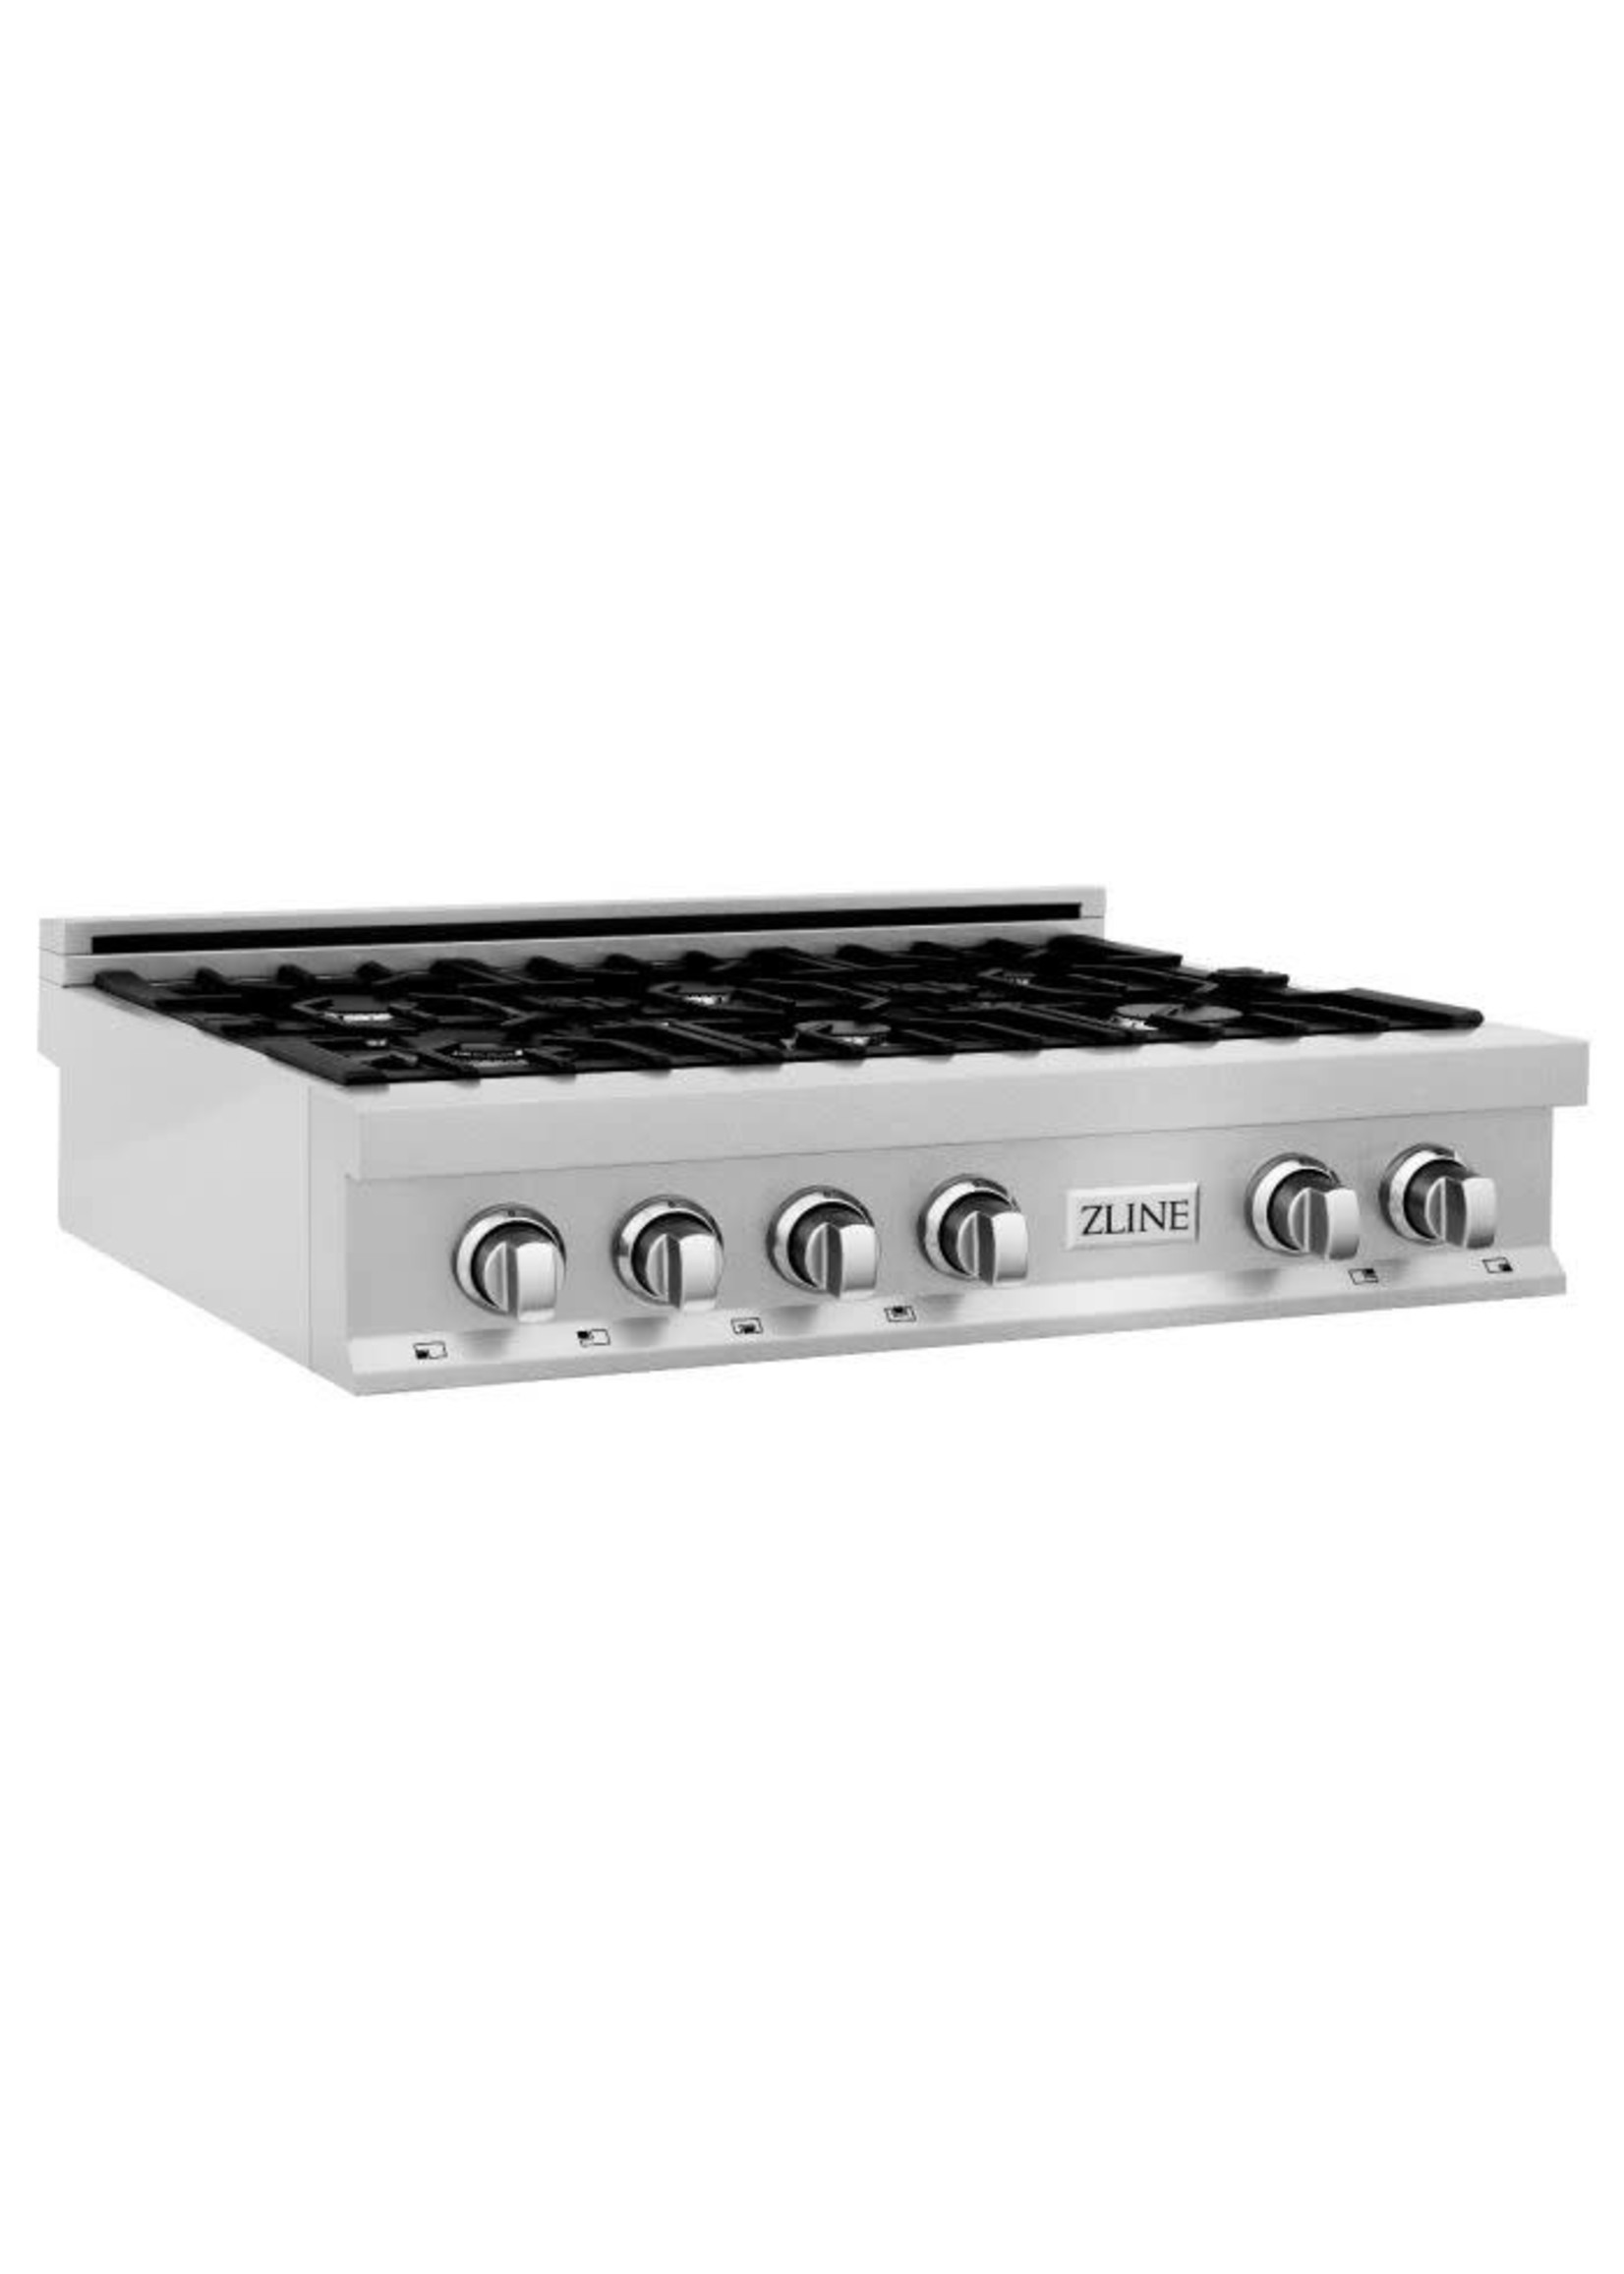 ZLINE ZLINE 36" Porcelain Gas Stovetop in DuraSnow® Stainless Steel with 6 Gas Burners